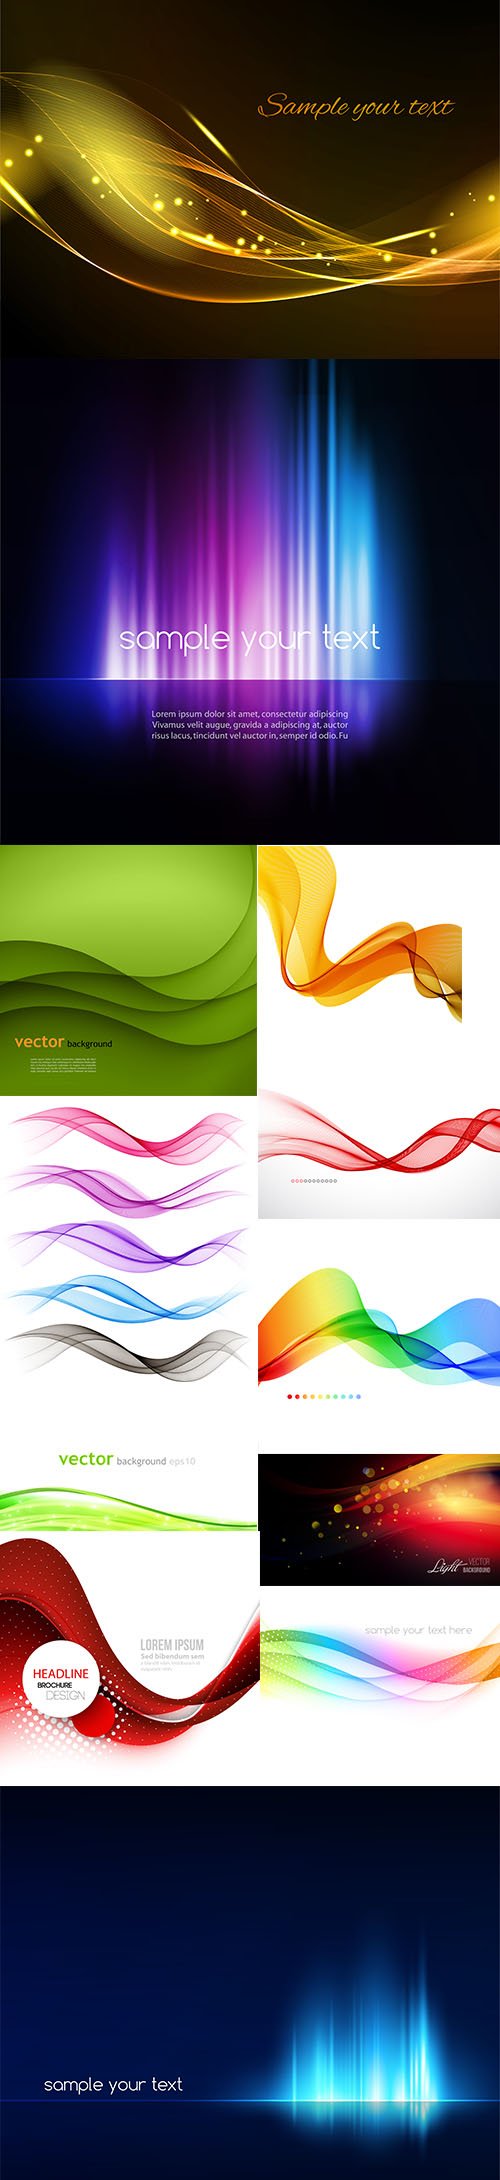 Abstract wave and shiny Vector background